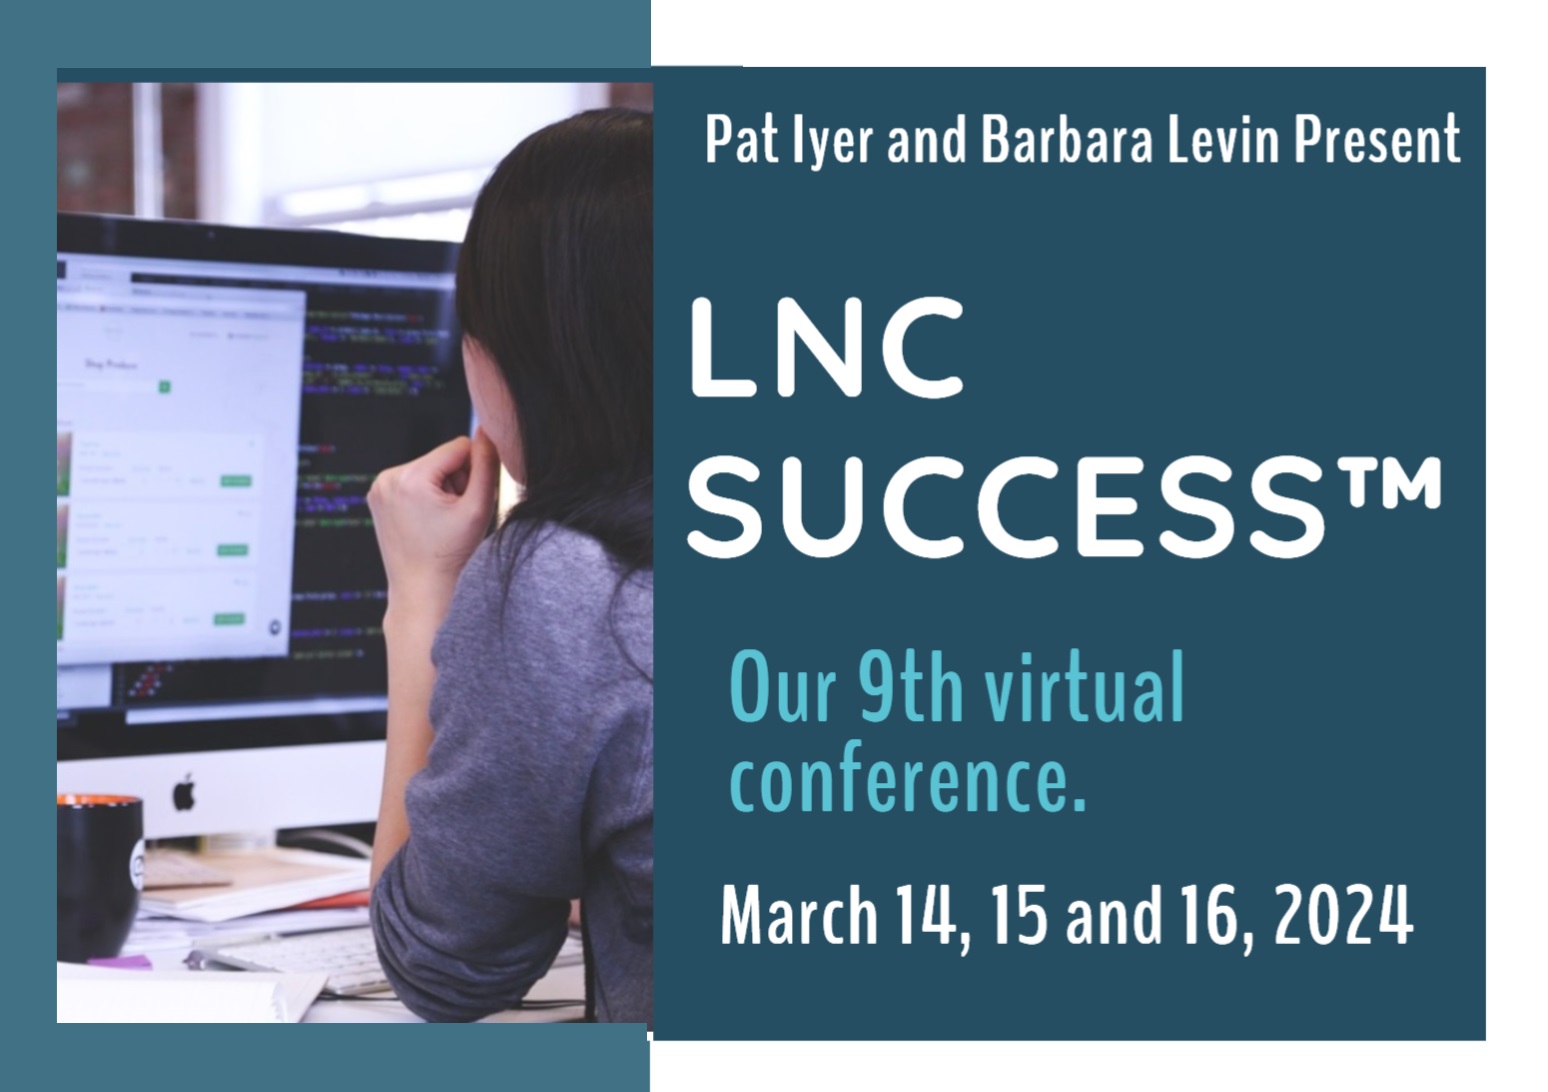 LNC Success 9th Virtual Conference March 14, 15, and 16, 2024